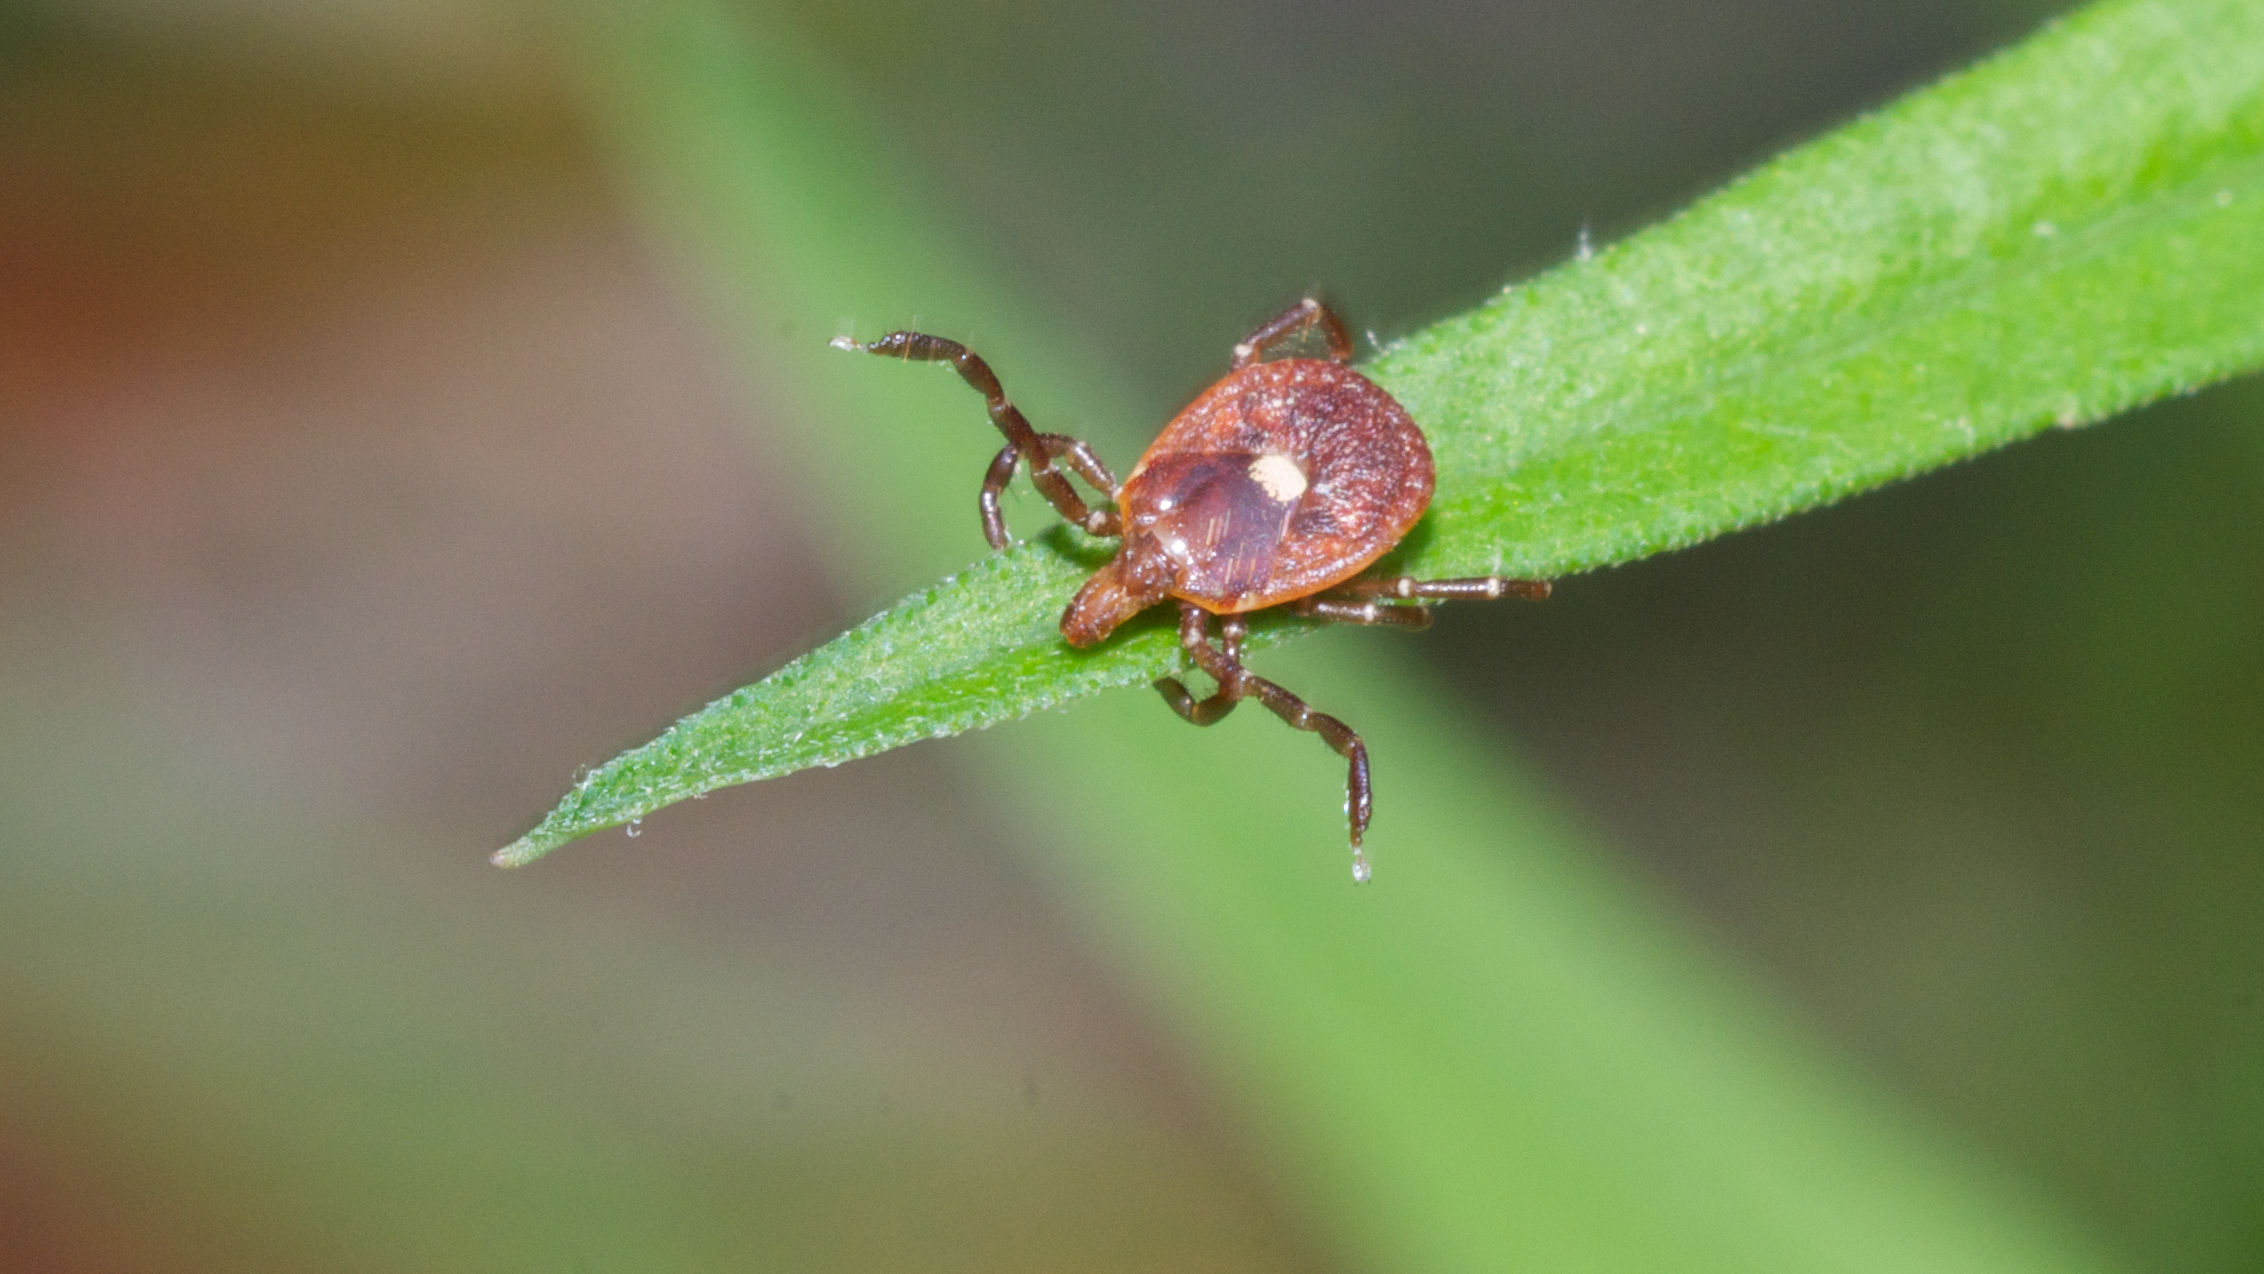 A female lone star tick perched on a blade of grass waits, with her legs outstretched, for a host to pass by and make contact. Such "questing" behavior also allows these ticks to home in on sources of carbon dioxide — like humans.